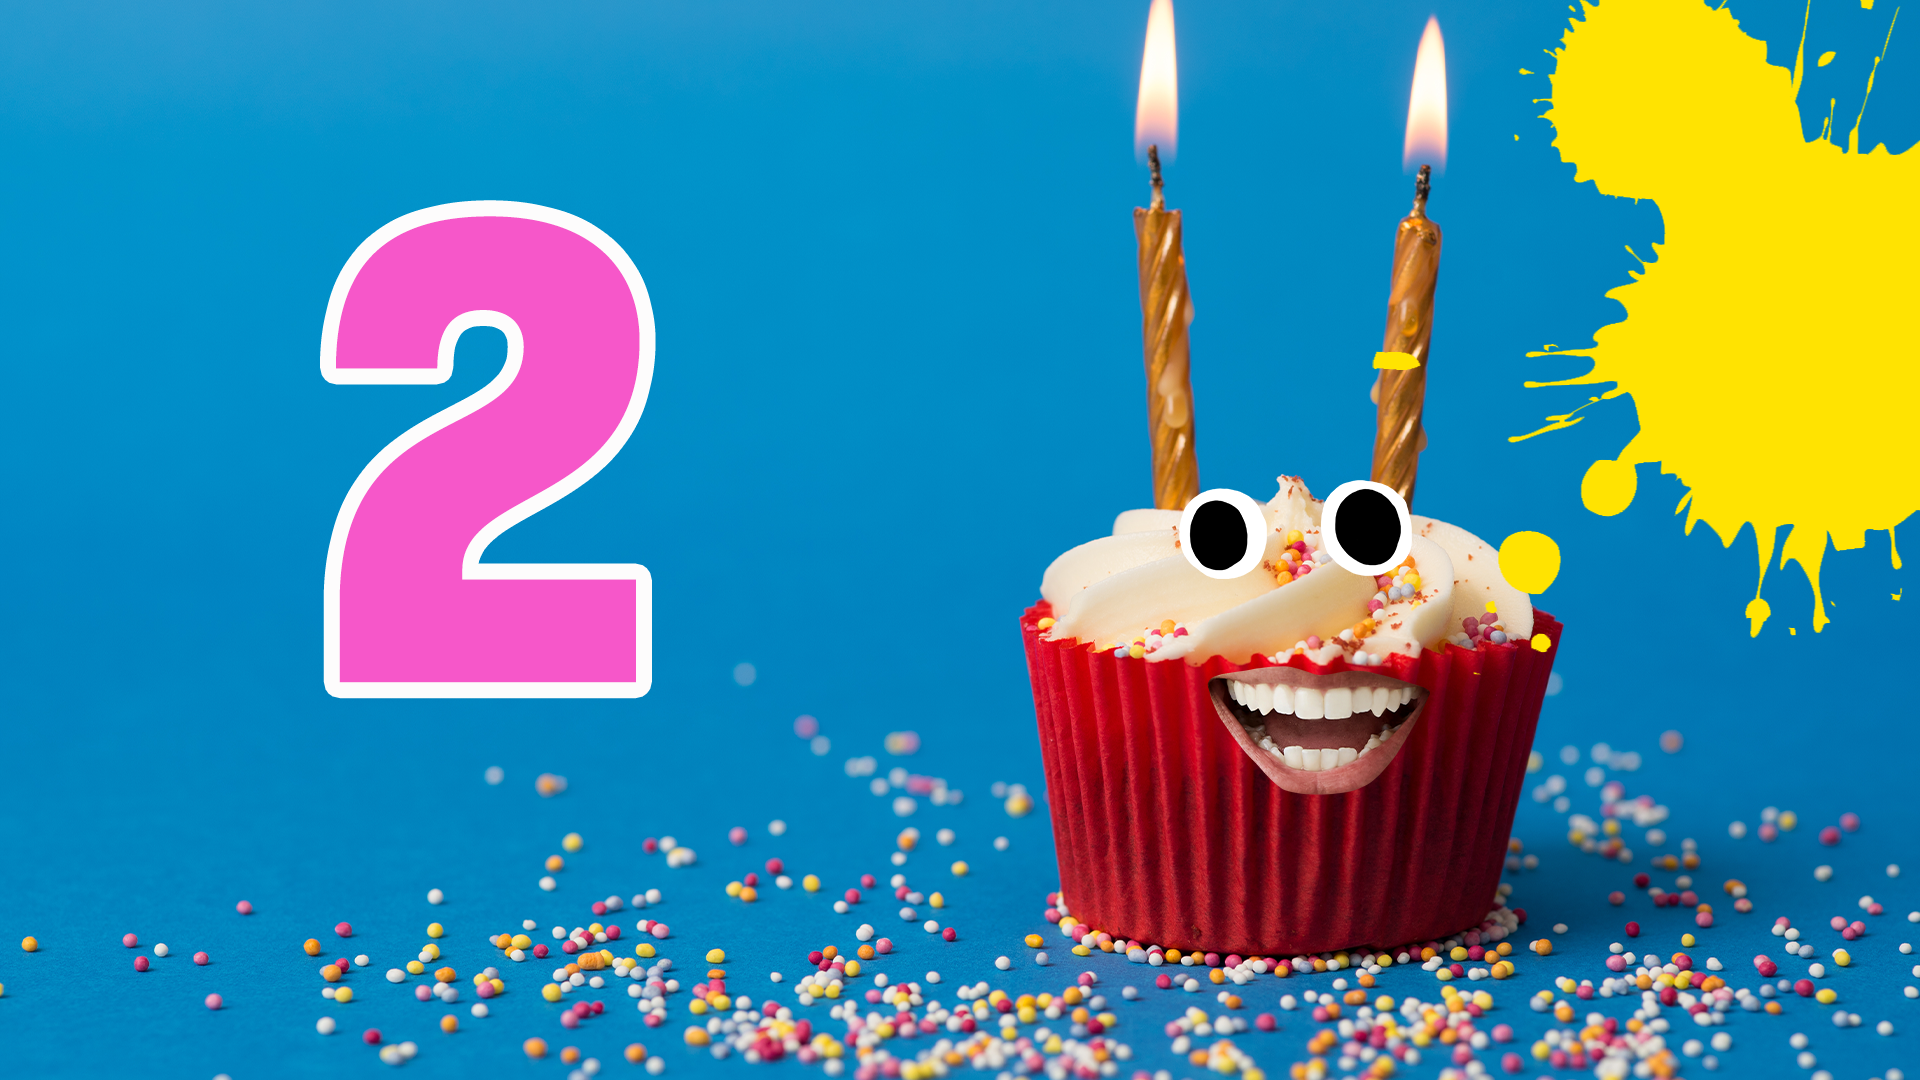 Cake with two candles and face, the number 2 and splats on blue background with sprinkles 